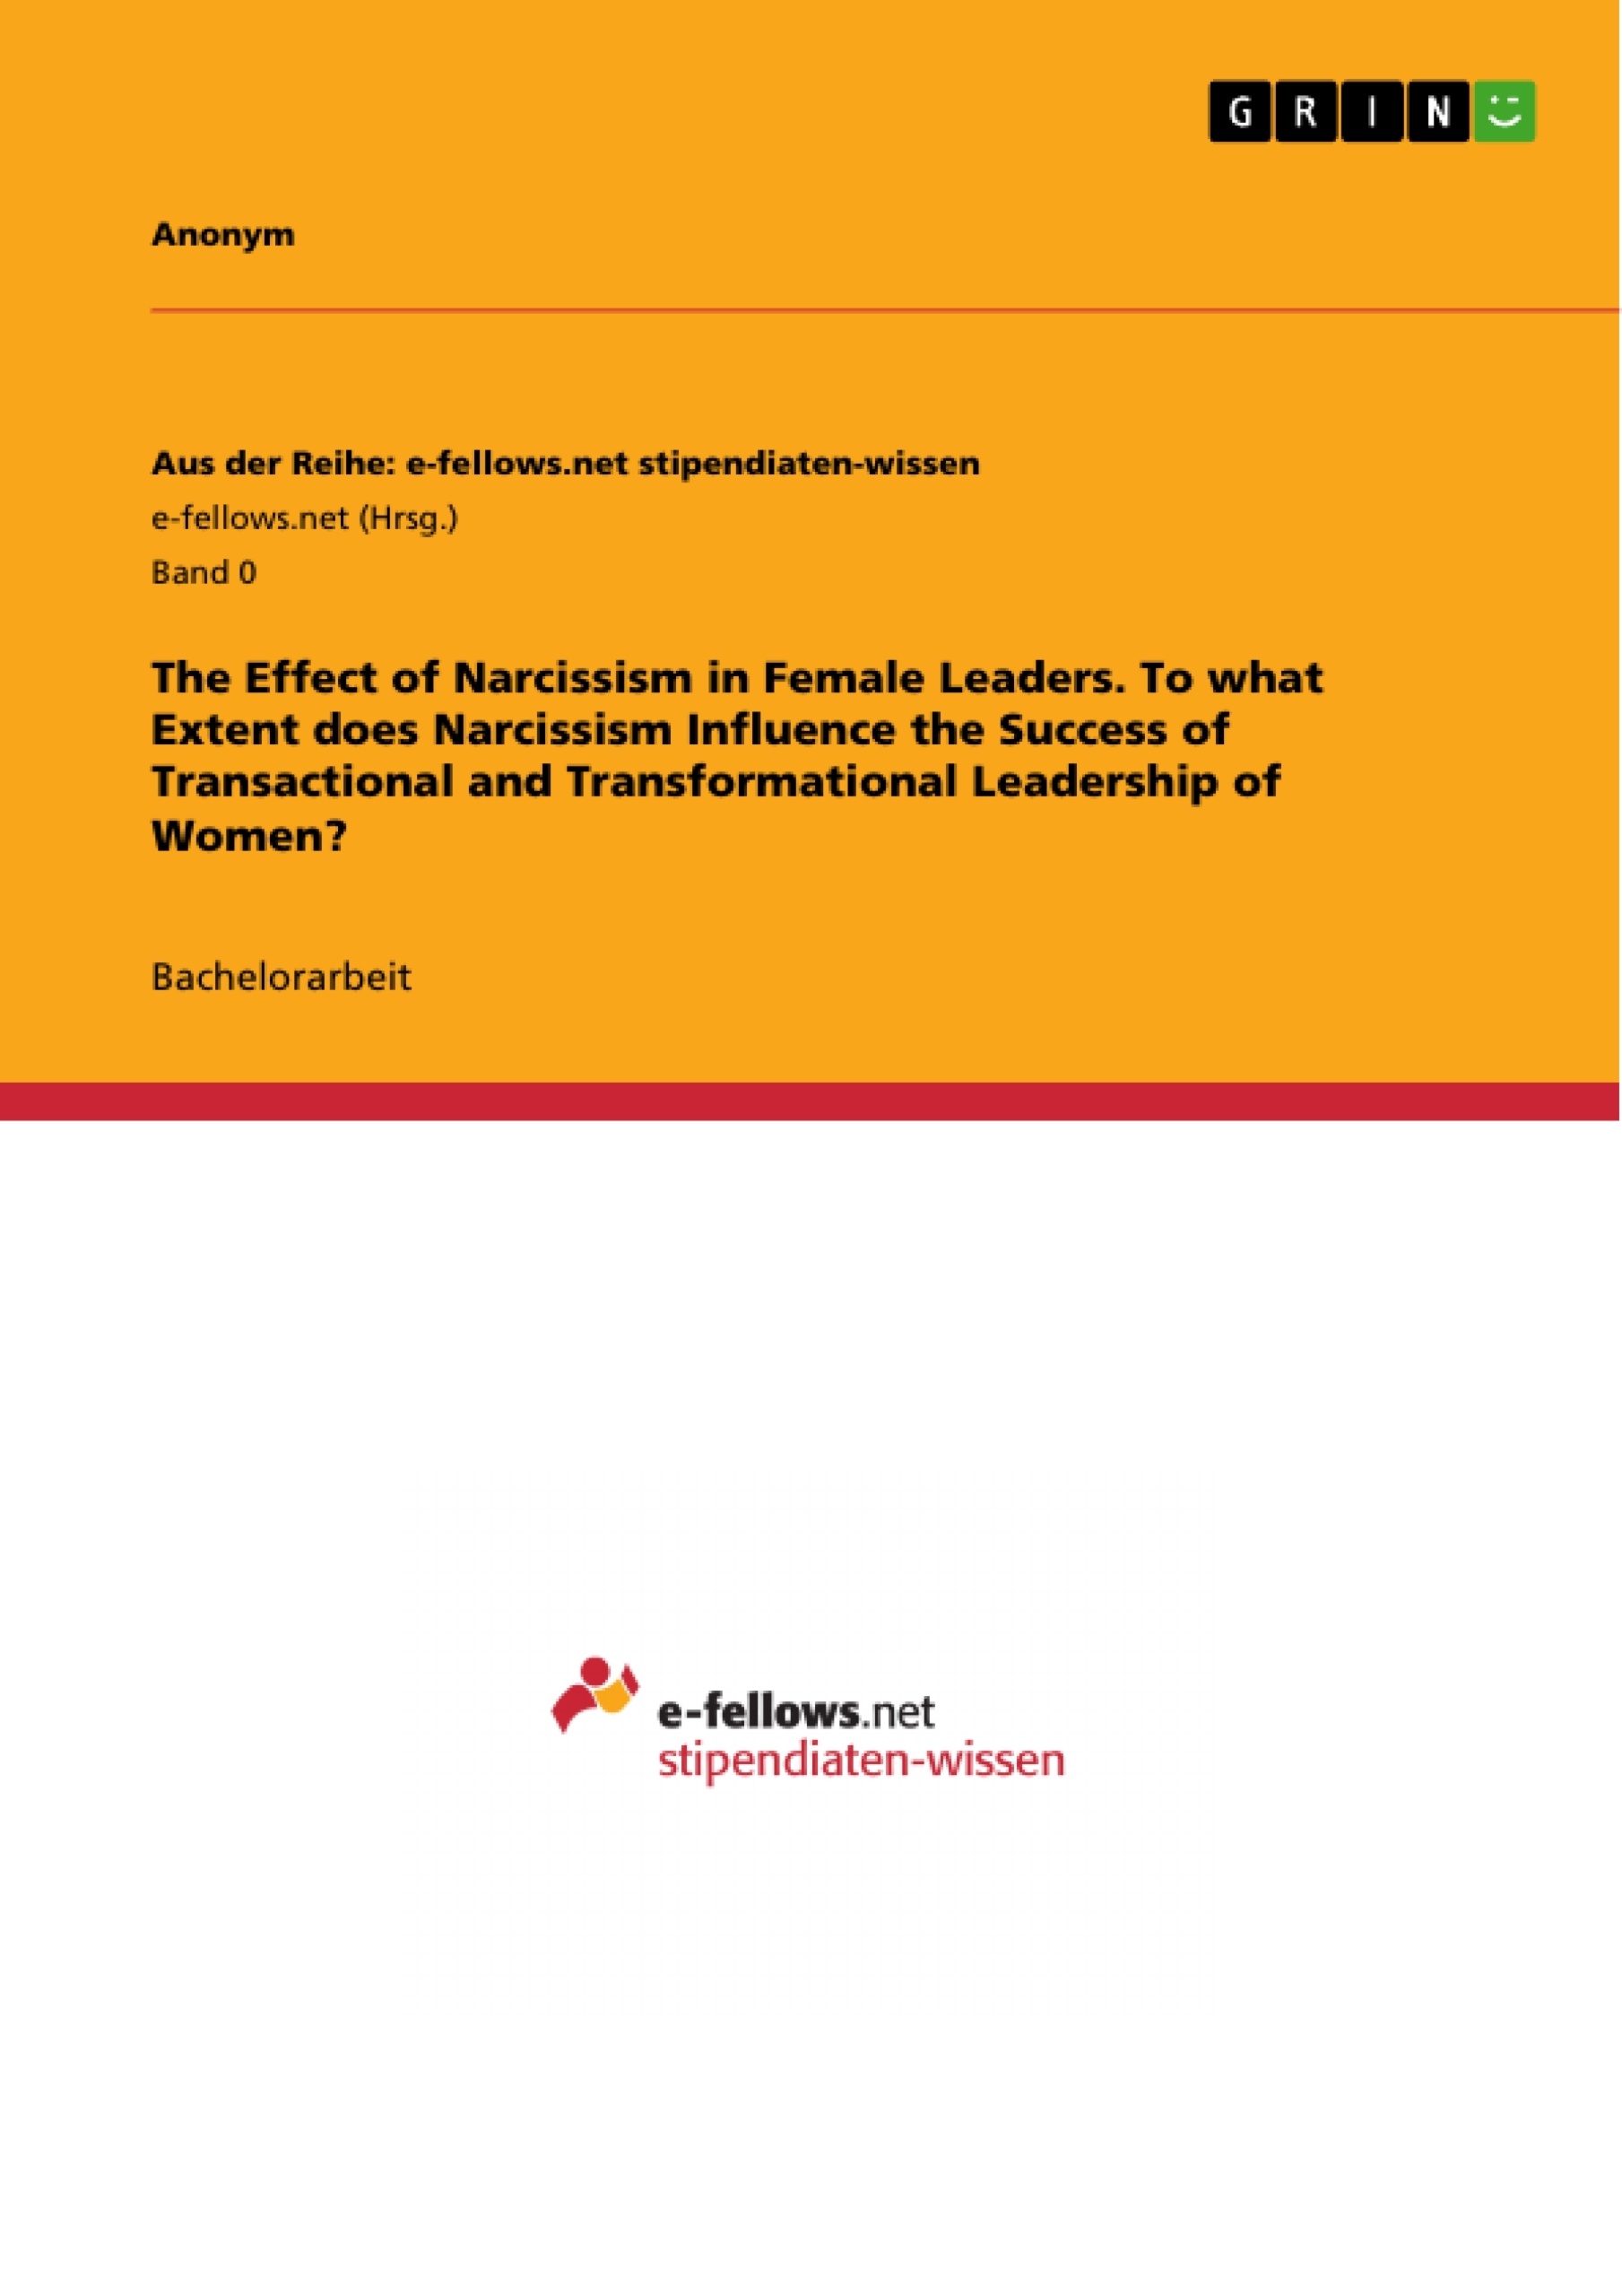 Titel: The Effect of Narcissism in Female Leaders. To what Extent does Narcissism Influence the Success of Transactional and Transformational Leadership of Women?